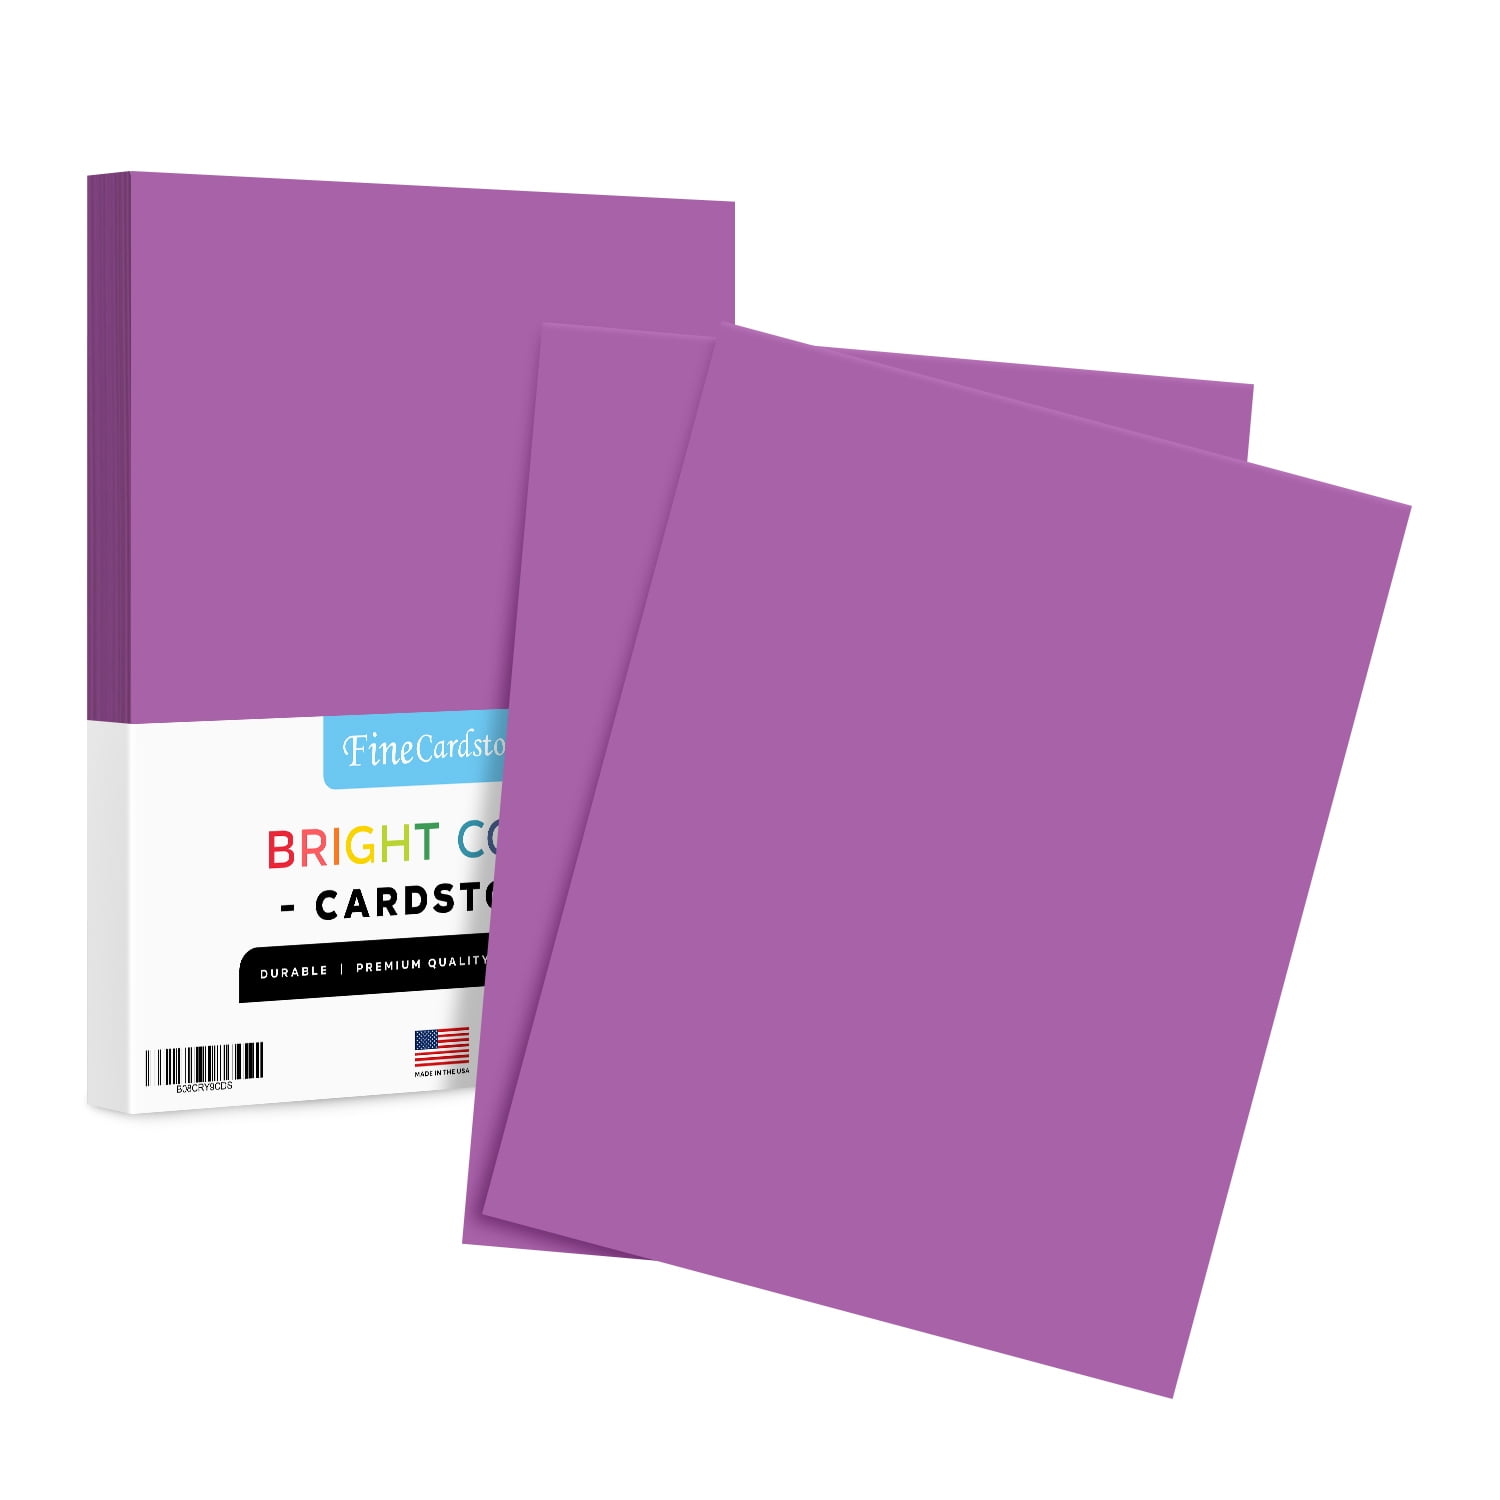 65lb Cover Cardstock Paper Purple 25 Sheets 8.5 x 11 inch